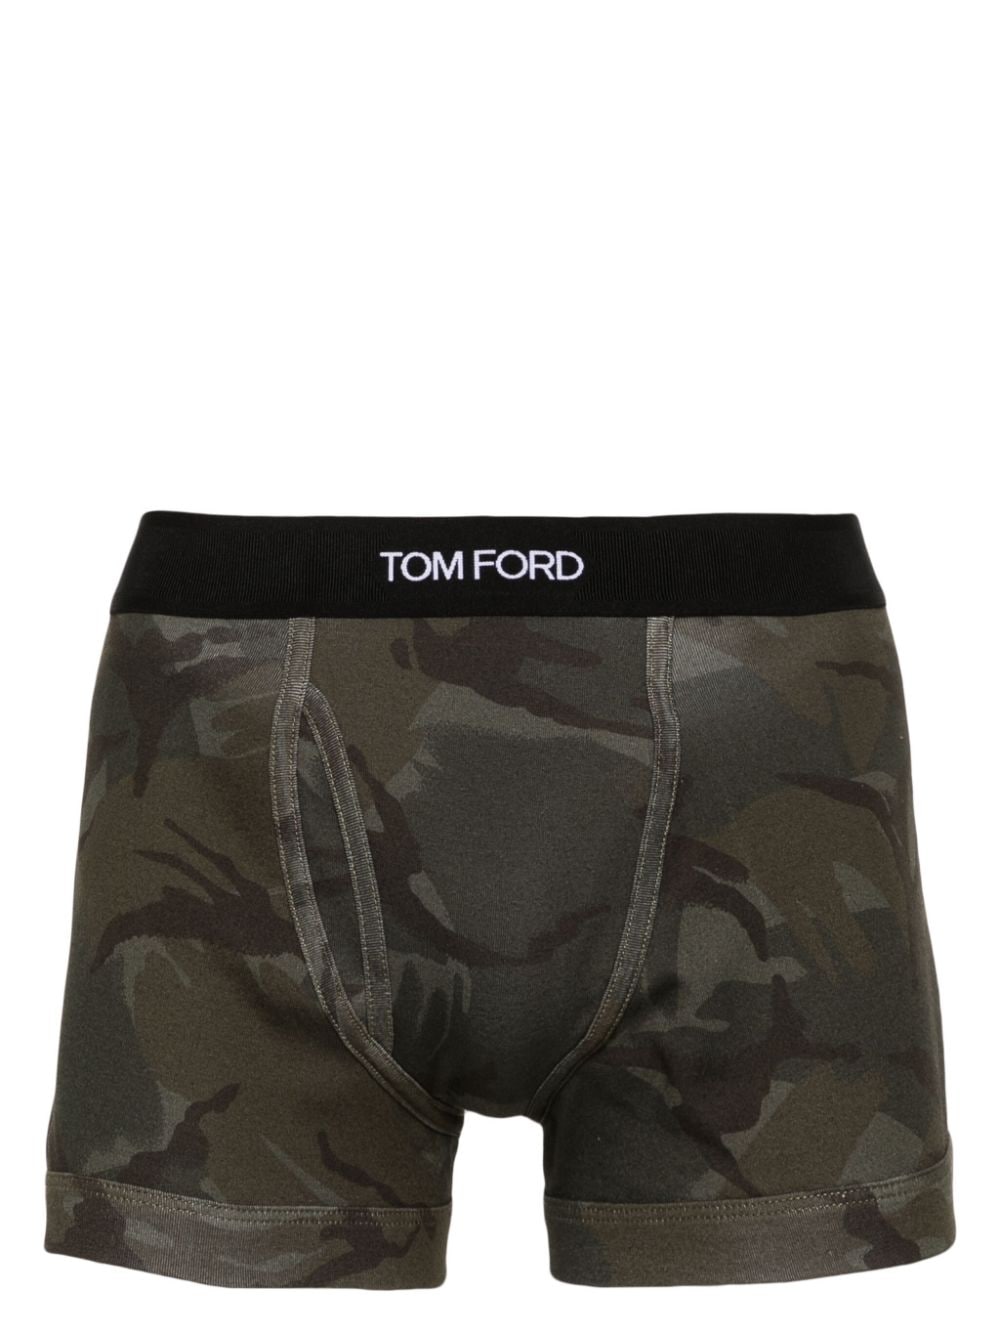 TOM FORD patterned stretch-cotton boxers - Grey von TOM FORD